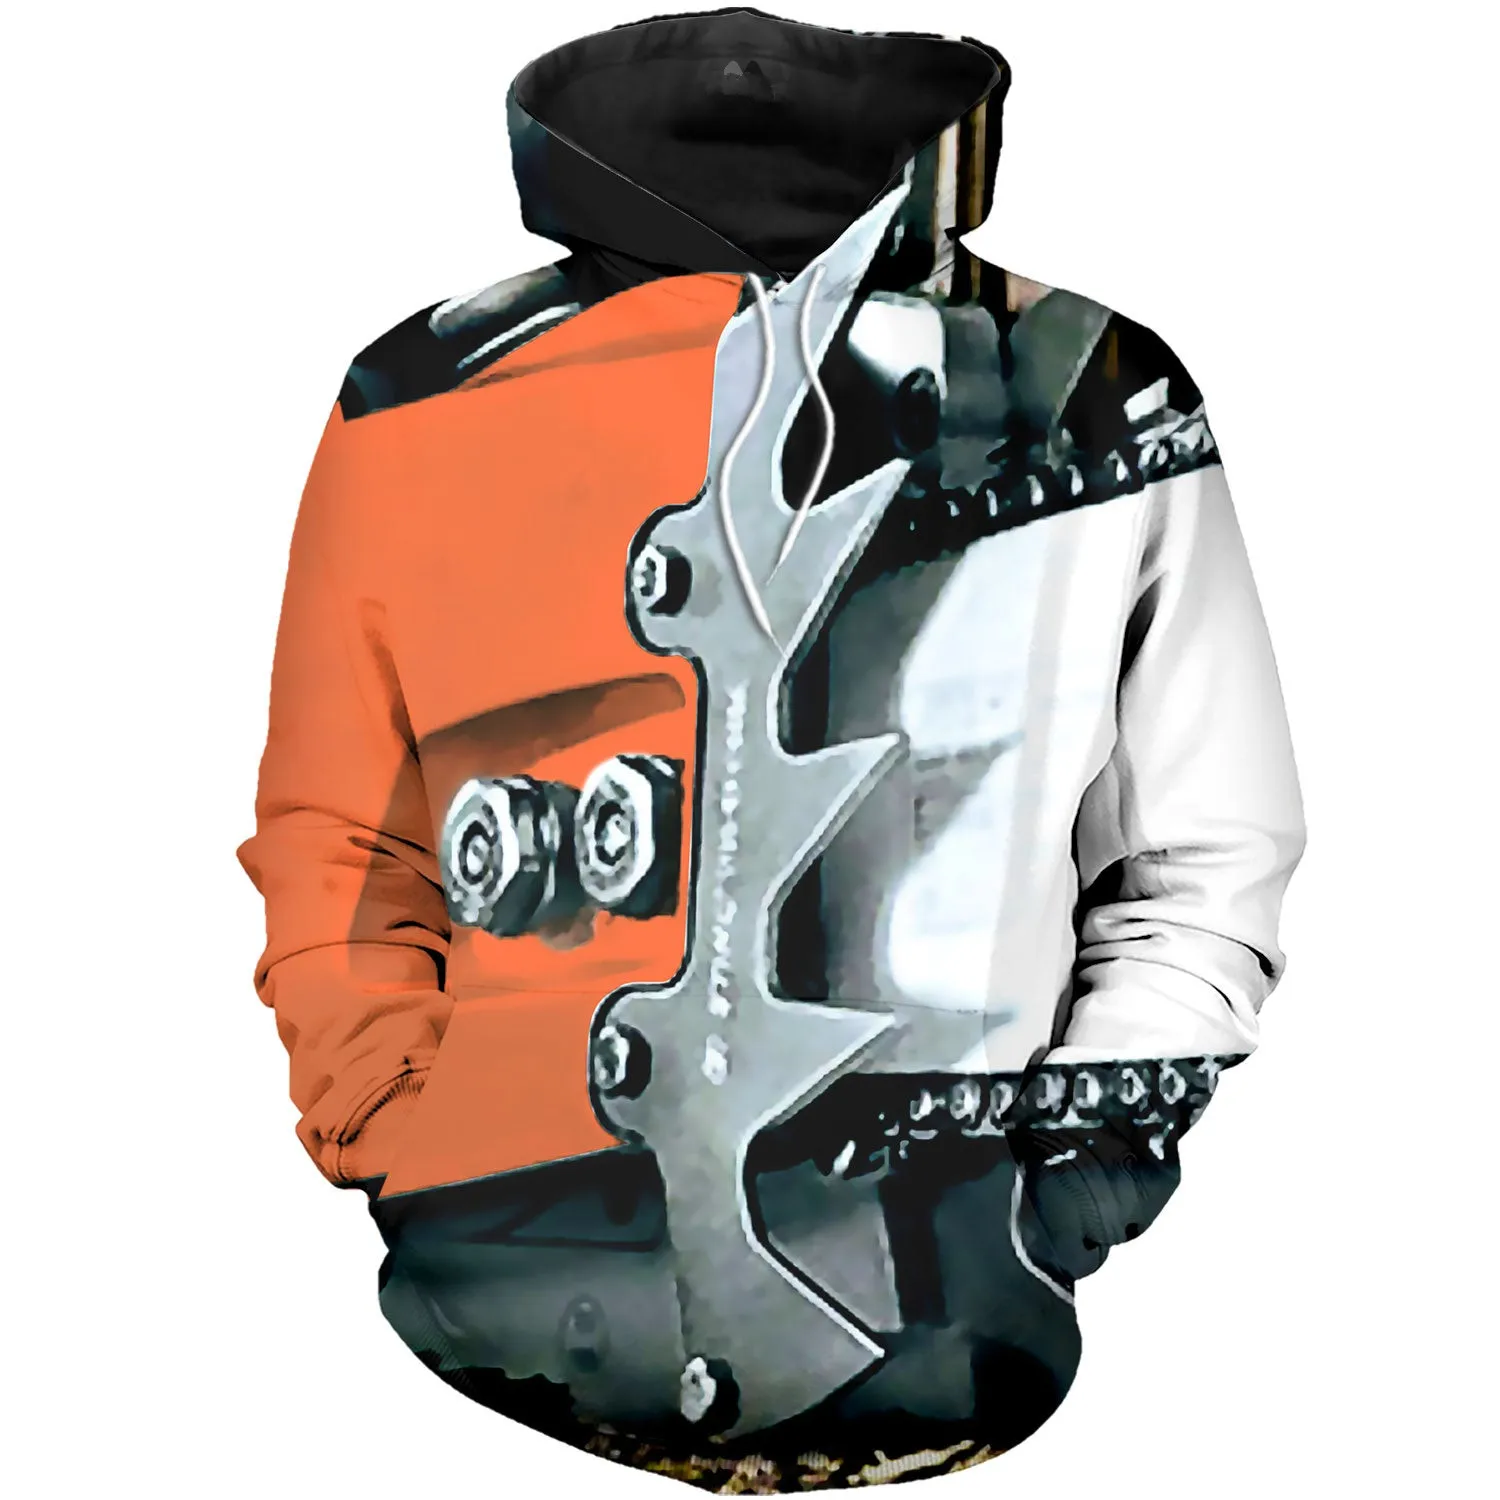 

Fashion Chainsaw Costume 3D All Over Printed Shirts for Men and Women Pullover Sweatshirt Casual Zip Hoodies Unisex Jacket